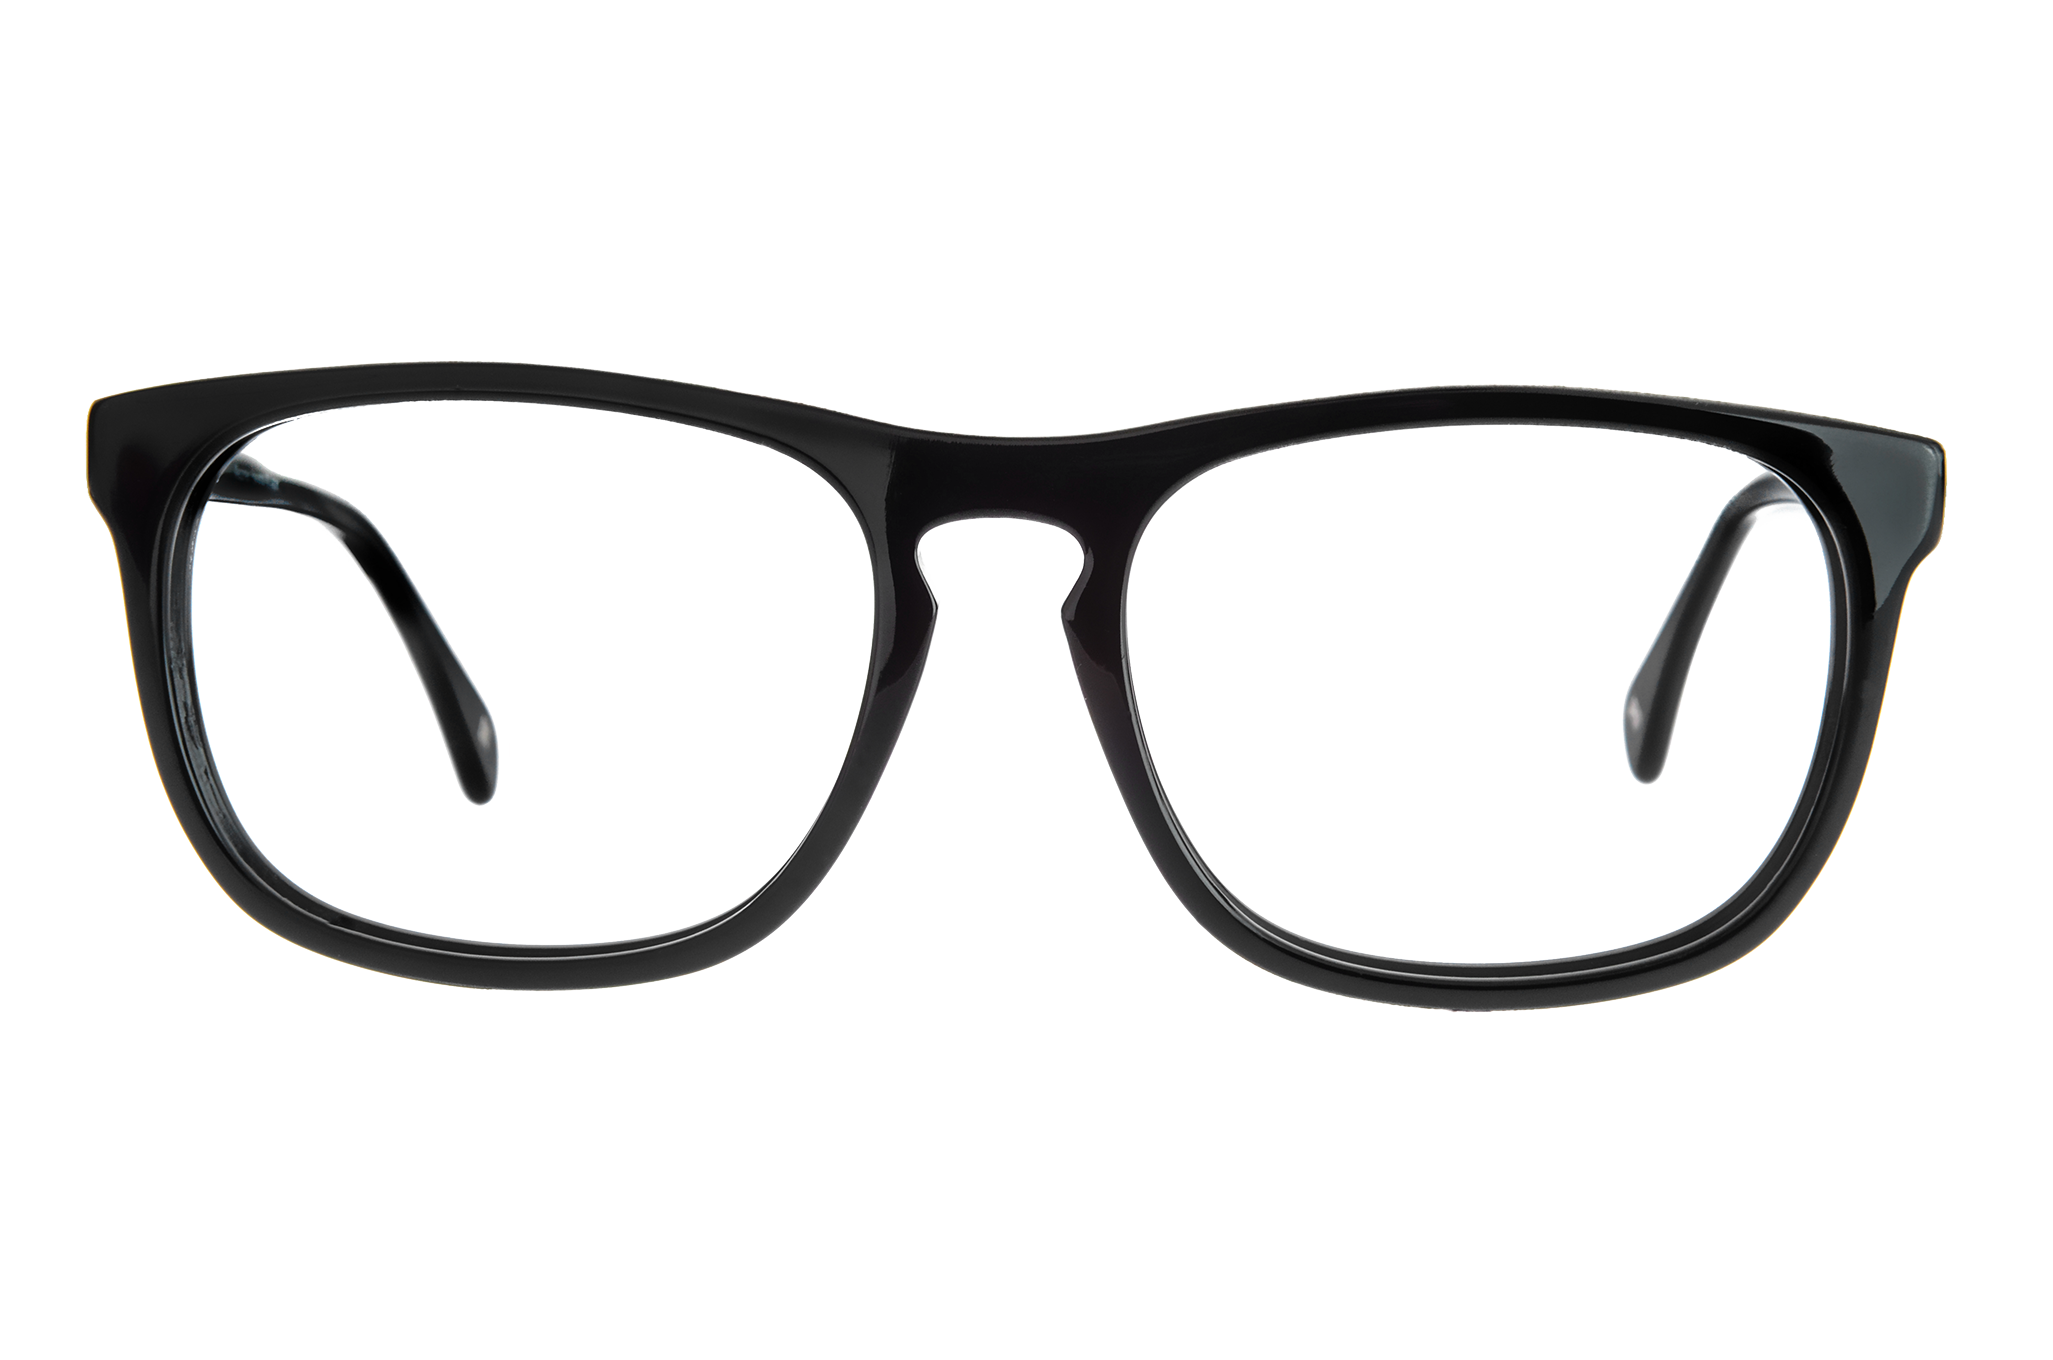 Glasses PNG Image for Free Download